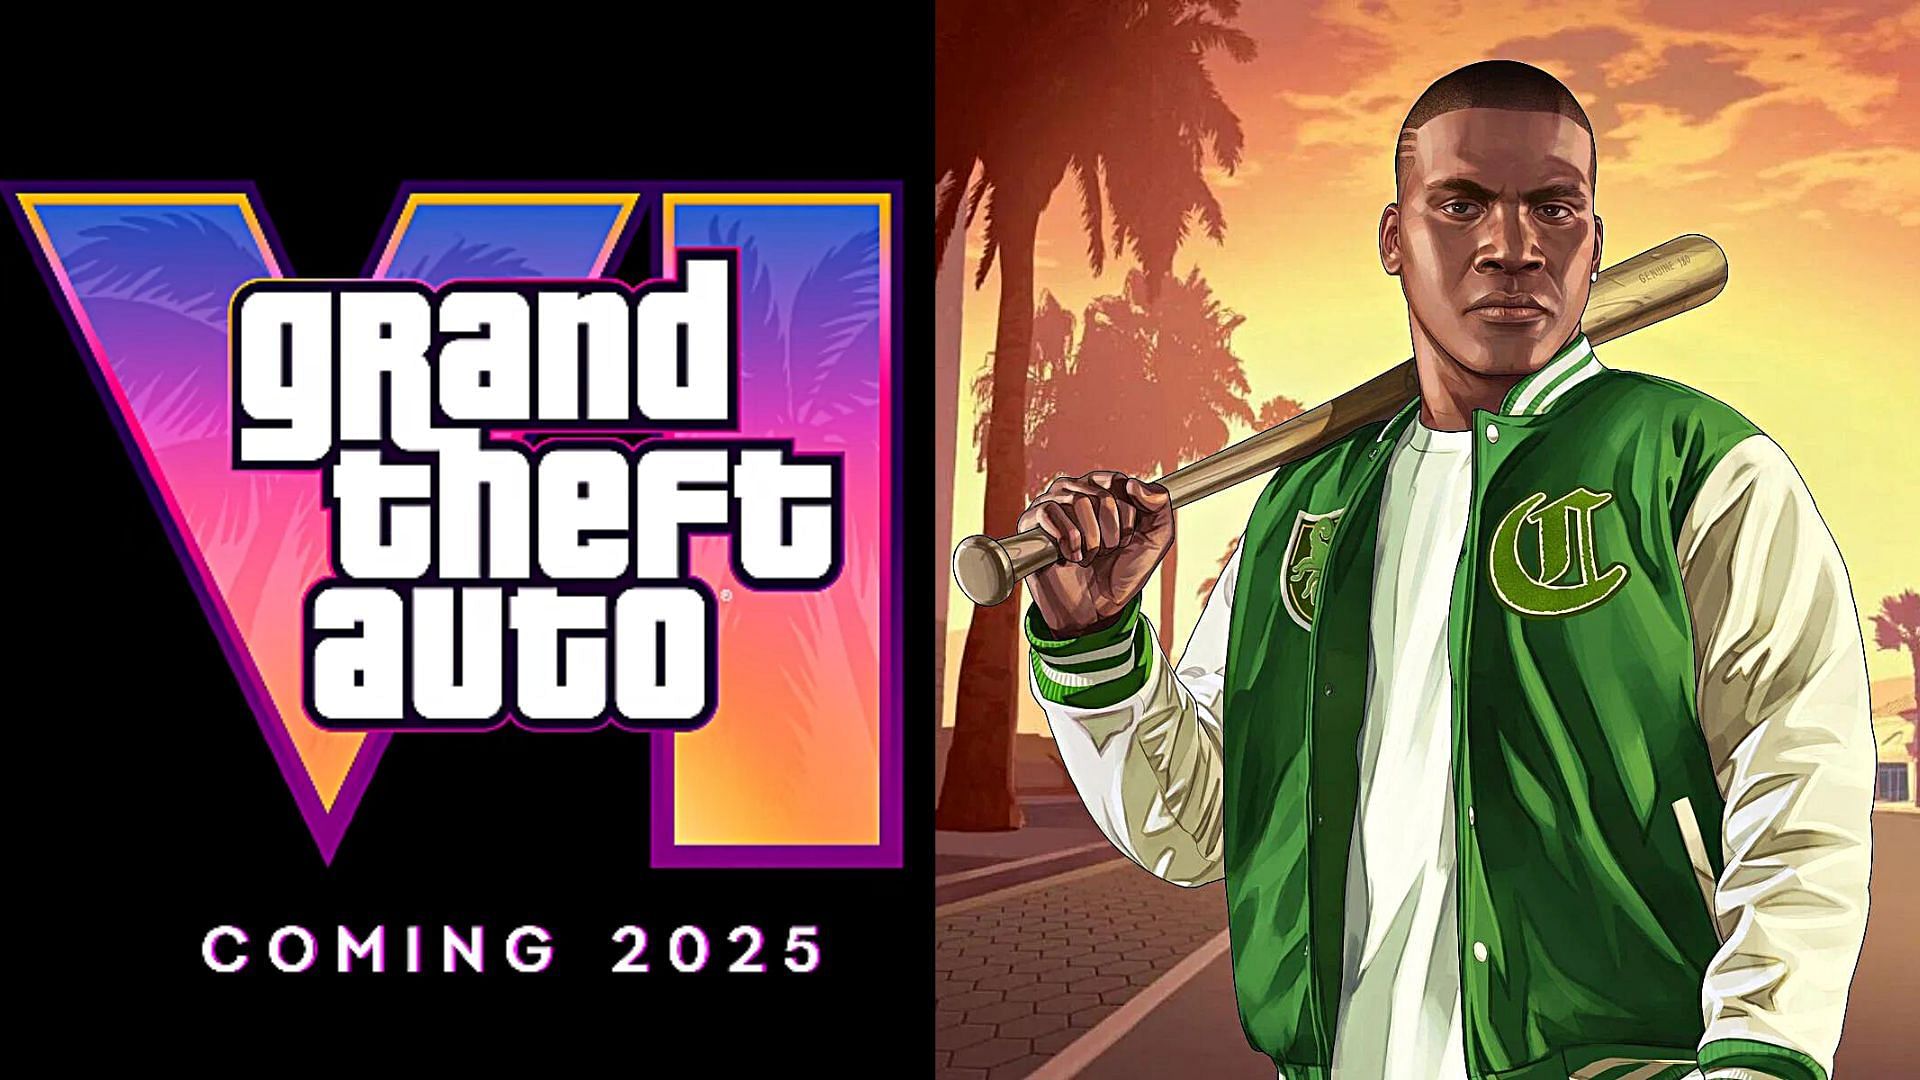 Franklin Clinton is voiced by Shawn Fonteno in GTA 5 (Images via Rockstar Games)